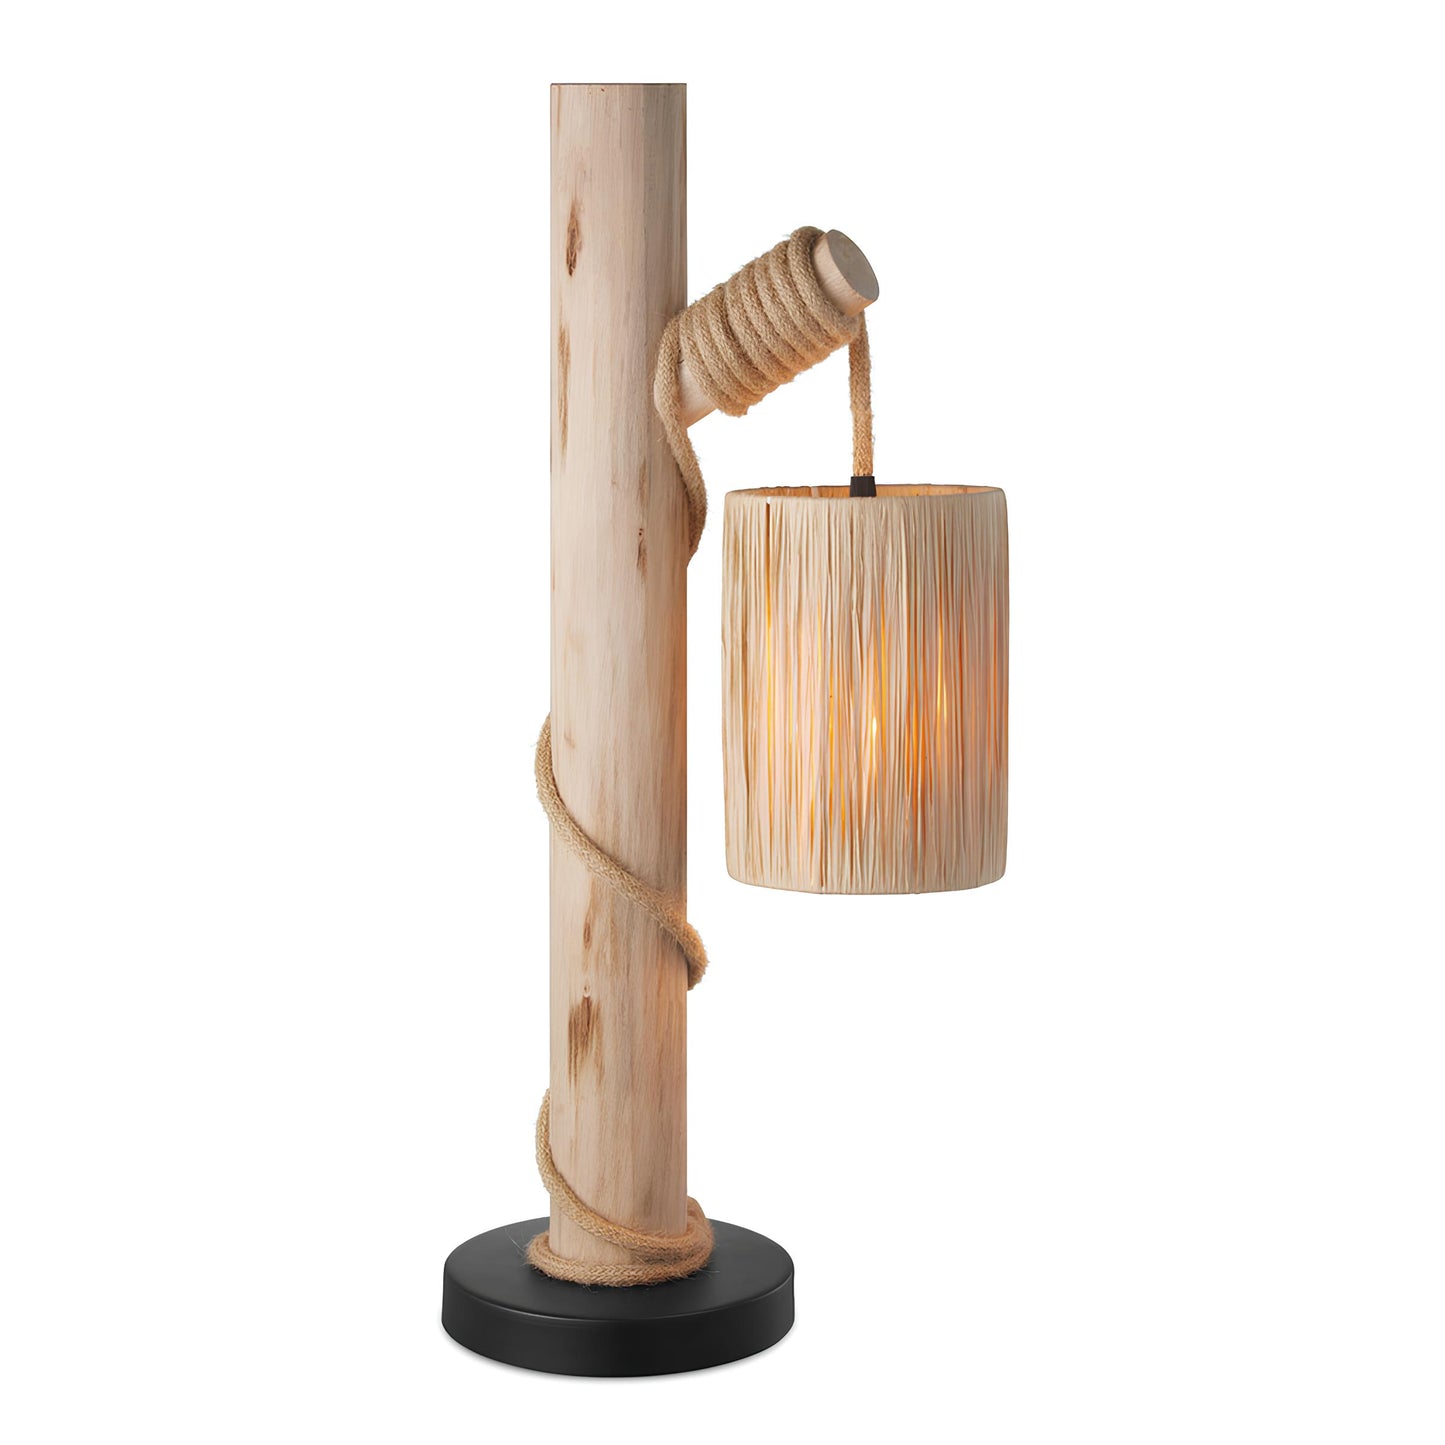 Rattan Table lamp for Living room | Bamboo Bedside table lamp | Cane Table lamp - Krisha - Akway